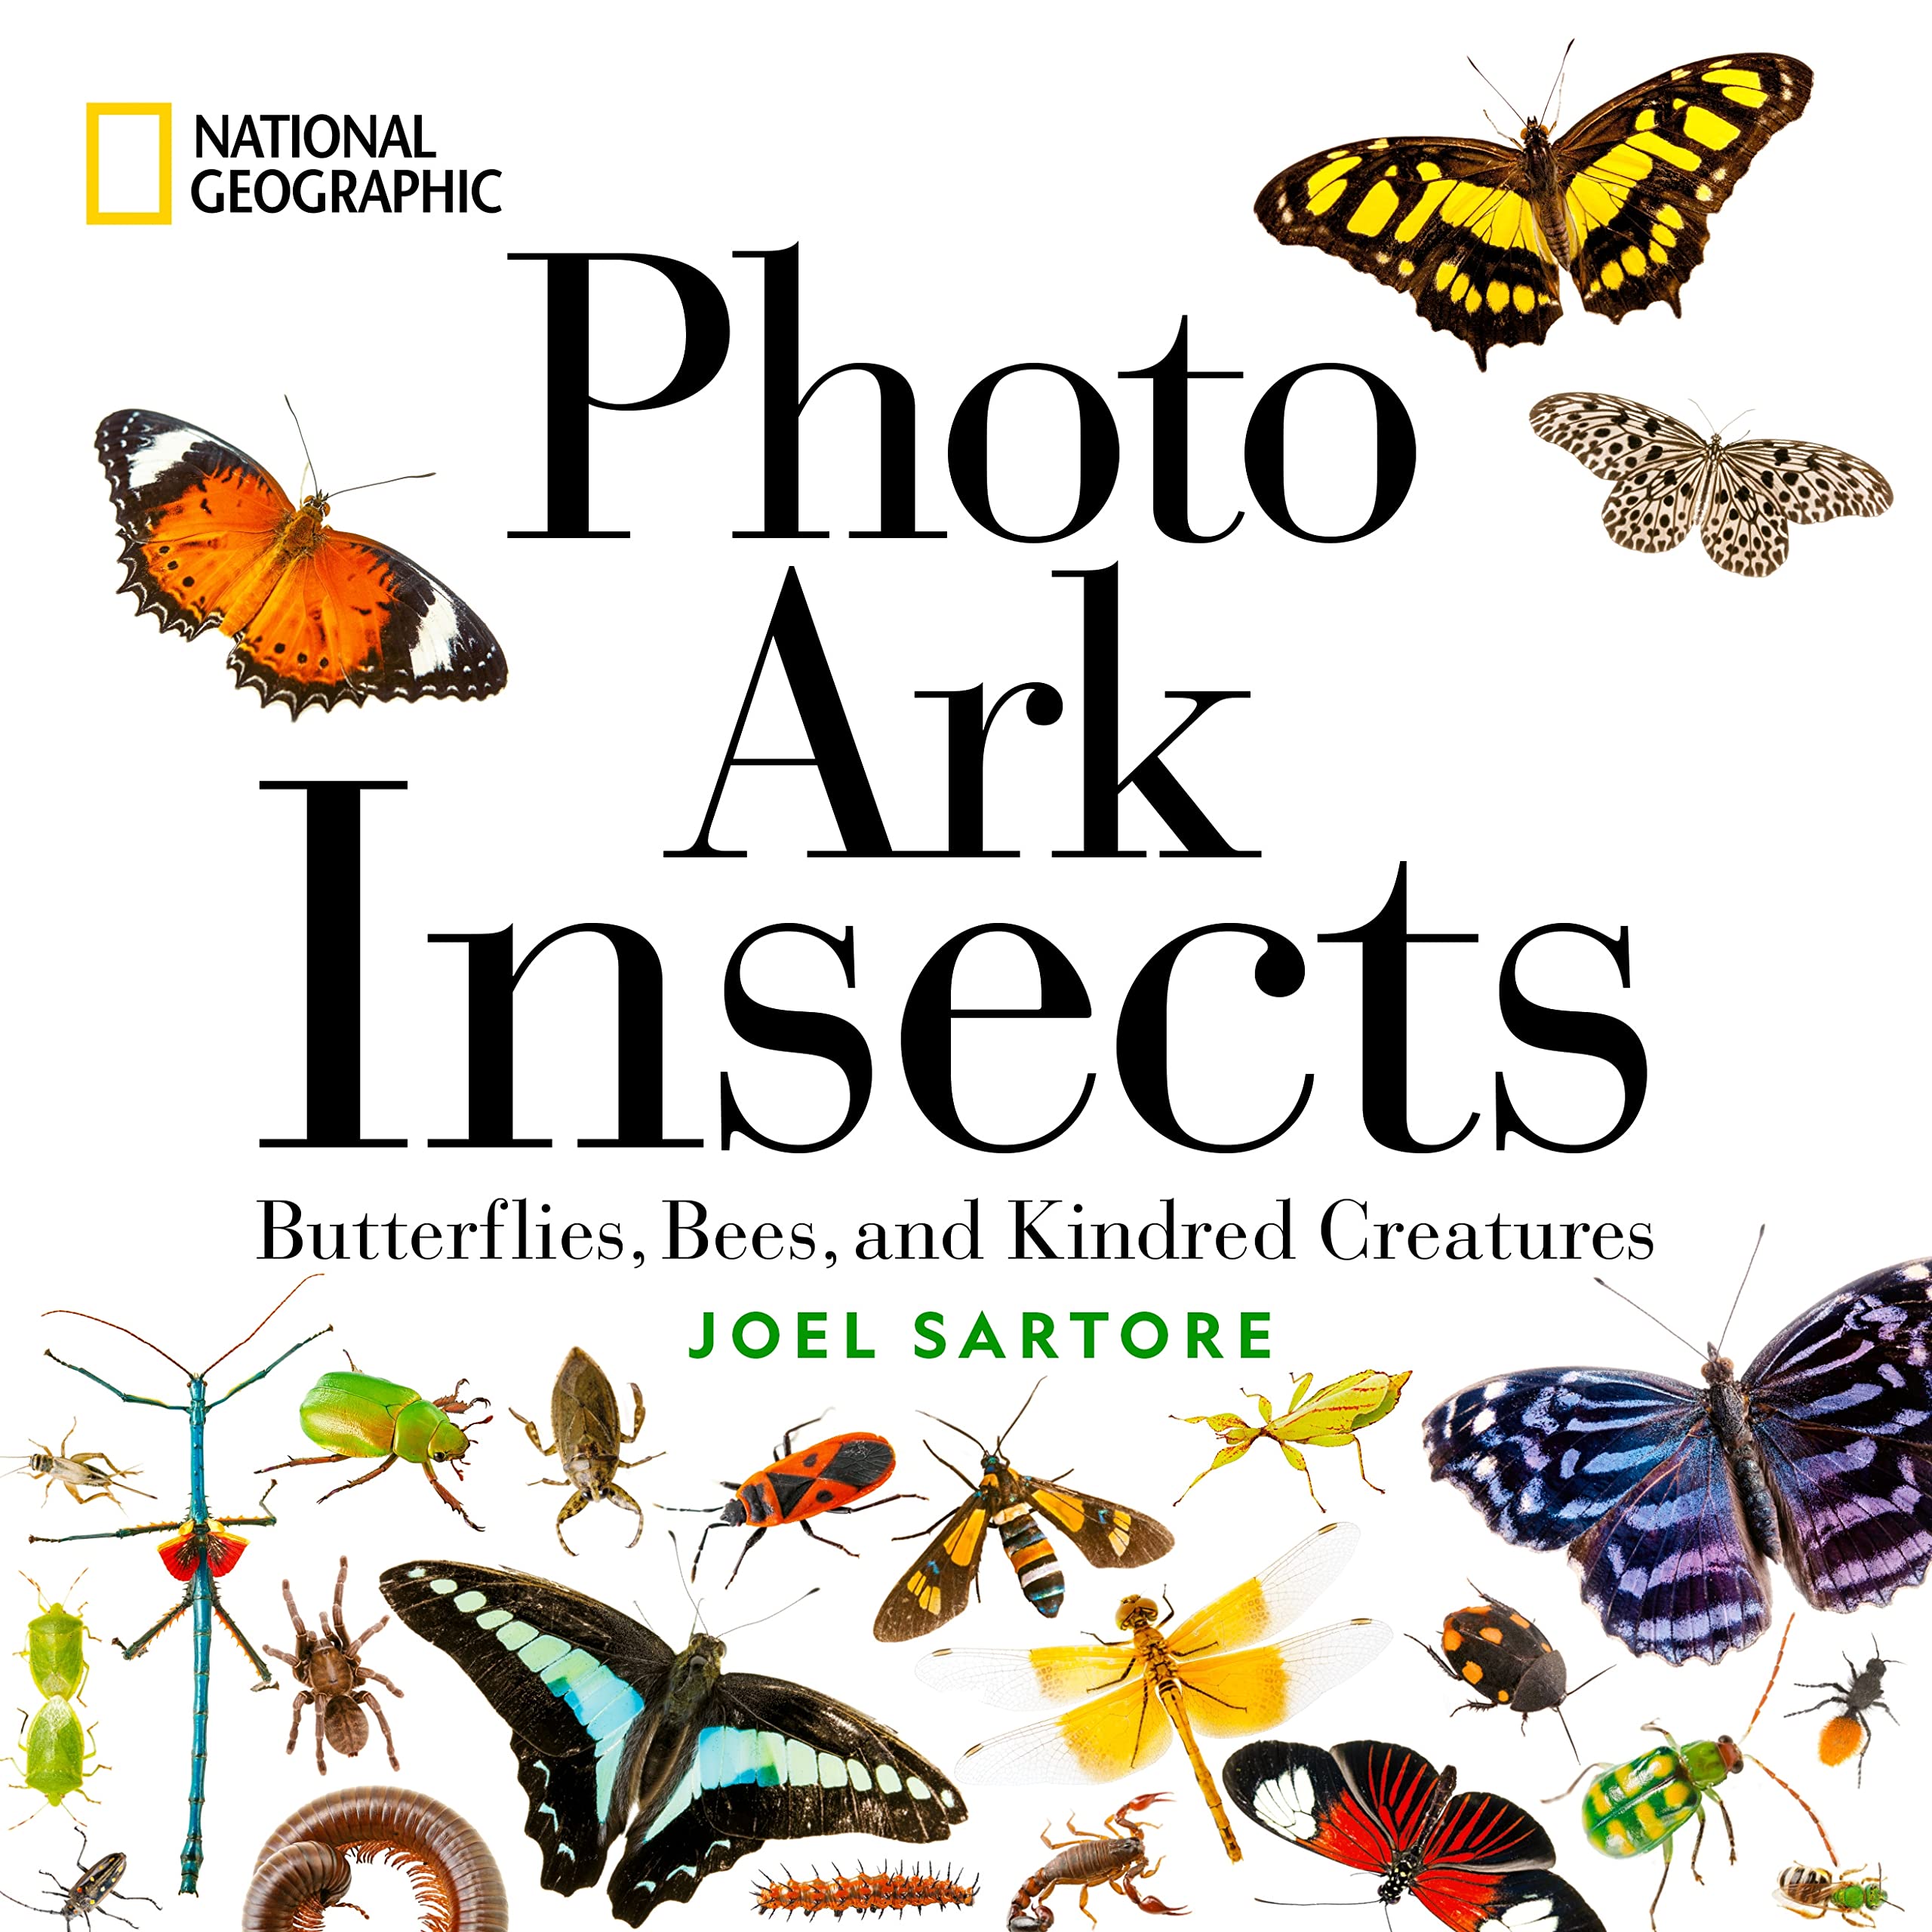 National Geographic Photo Ark Insects: Butterflies, Bees, and Kindred Creatures (The Photo Ark)